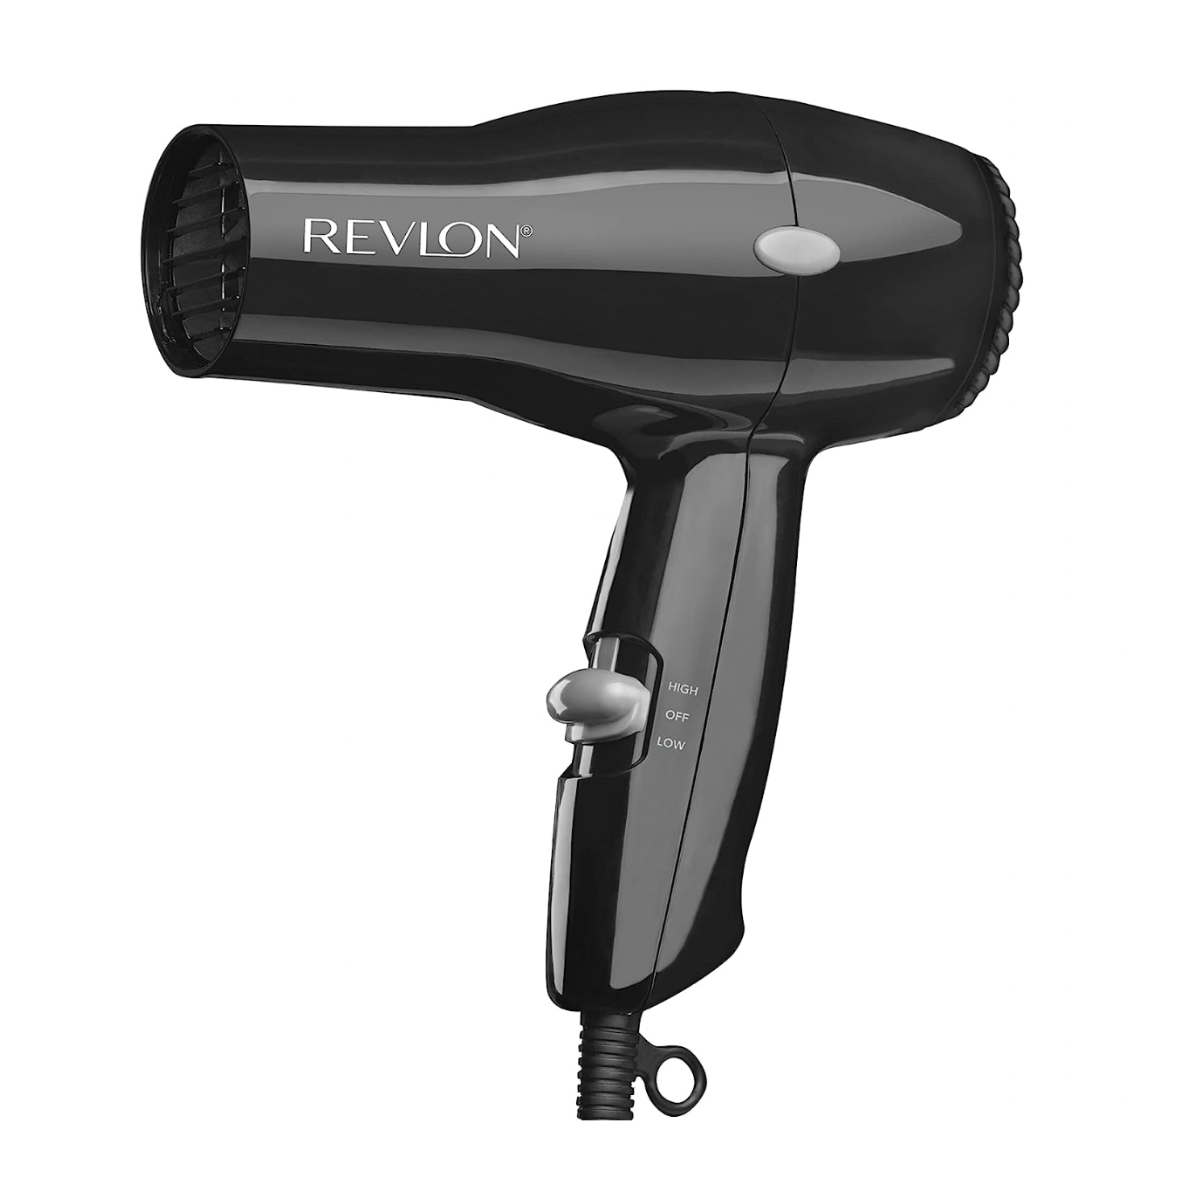 <p>Traveling on a budget but not willing to compromise on your beauty look? This incredibly budget-friendly pick from Revlon will get the job done. It has a powerful motor and a relatively lightweight design, but only two options: low or high.</p> <ul> <li><strong>Pros:</strong> Very affordable</li> <li><strong>Cons:</strong> Not dual-voltage, doesn’t fold</li> <li><strong>Weight:</strong> 1.18 pounds</li> <li><strong>Dual Voltage:</strong> No</li> </ul> $13, Amazon. <a href="https://www.amazon.com/Revlon-1875W-Compact-Travel-Dryer/dp/B003TQPRGY">Get it now!</a><p>Sign up for today’s biggest stories, from pop culture to politics.</p><a href="https://www.glamour.com/newsletter/news?sourceCode=msnsend">Sign Up</a>